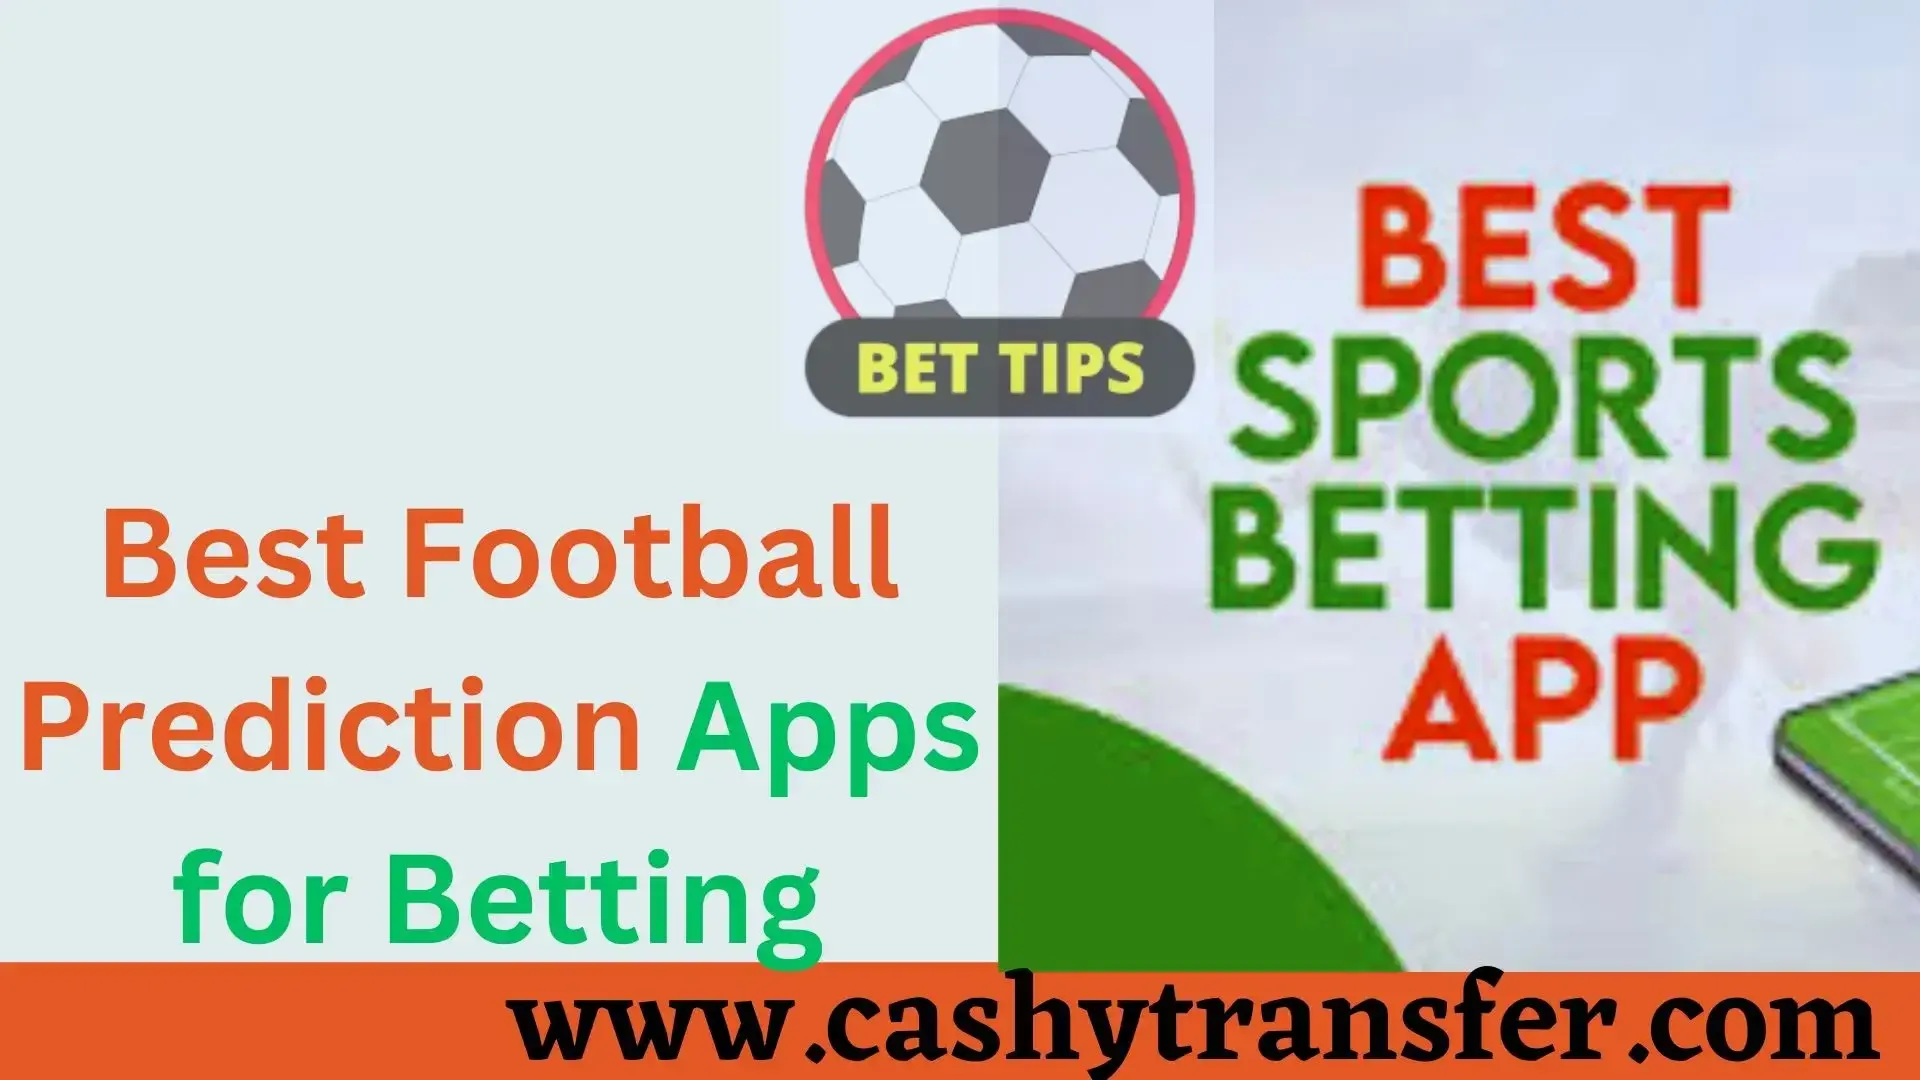 Best Football Prediction Apps for Betting